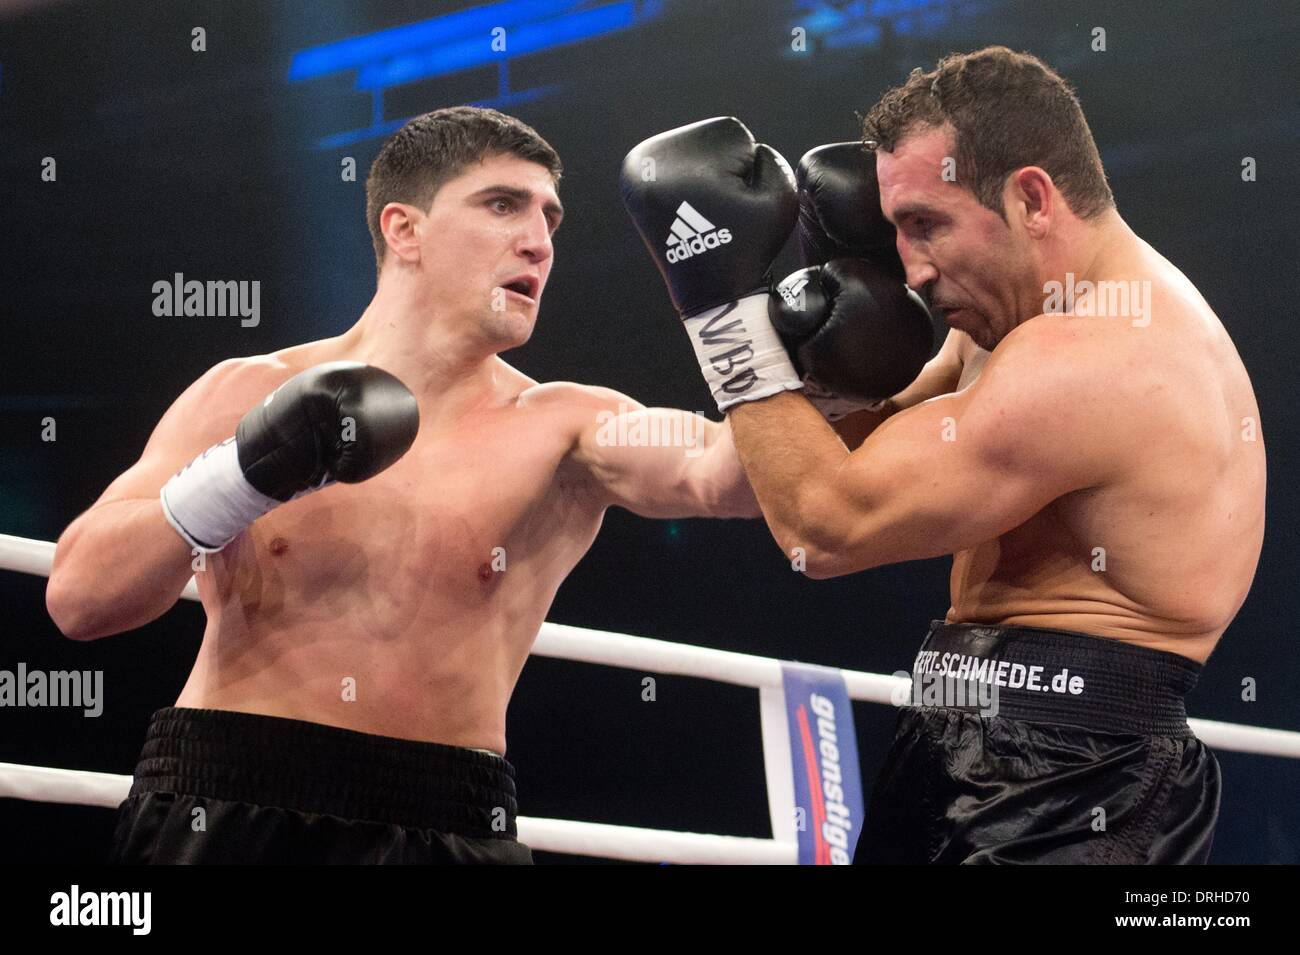 Stuttgart, Germany. 26th Jan, 2014. German WBO champion Marco Huck (L) in action against Firat Arslan during their World boxing Organization (WBO) Cruiserweight Championship match at Schleyer Hall in Stuttgart, Germany, 26 January 2014. Huck won against challenger Firat Arslan by technical k.o. in the sixth round. Photo: SEBASTIAN KAHNERT/dpa/Alamy Live News Stock Photo